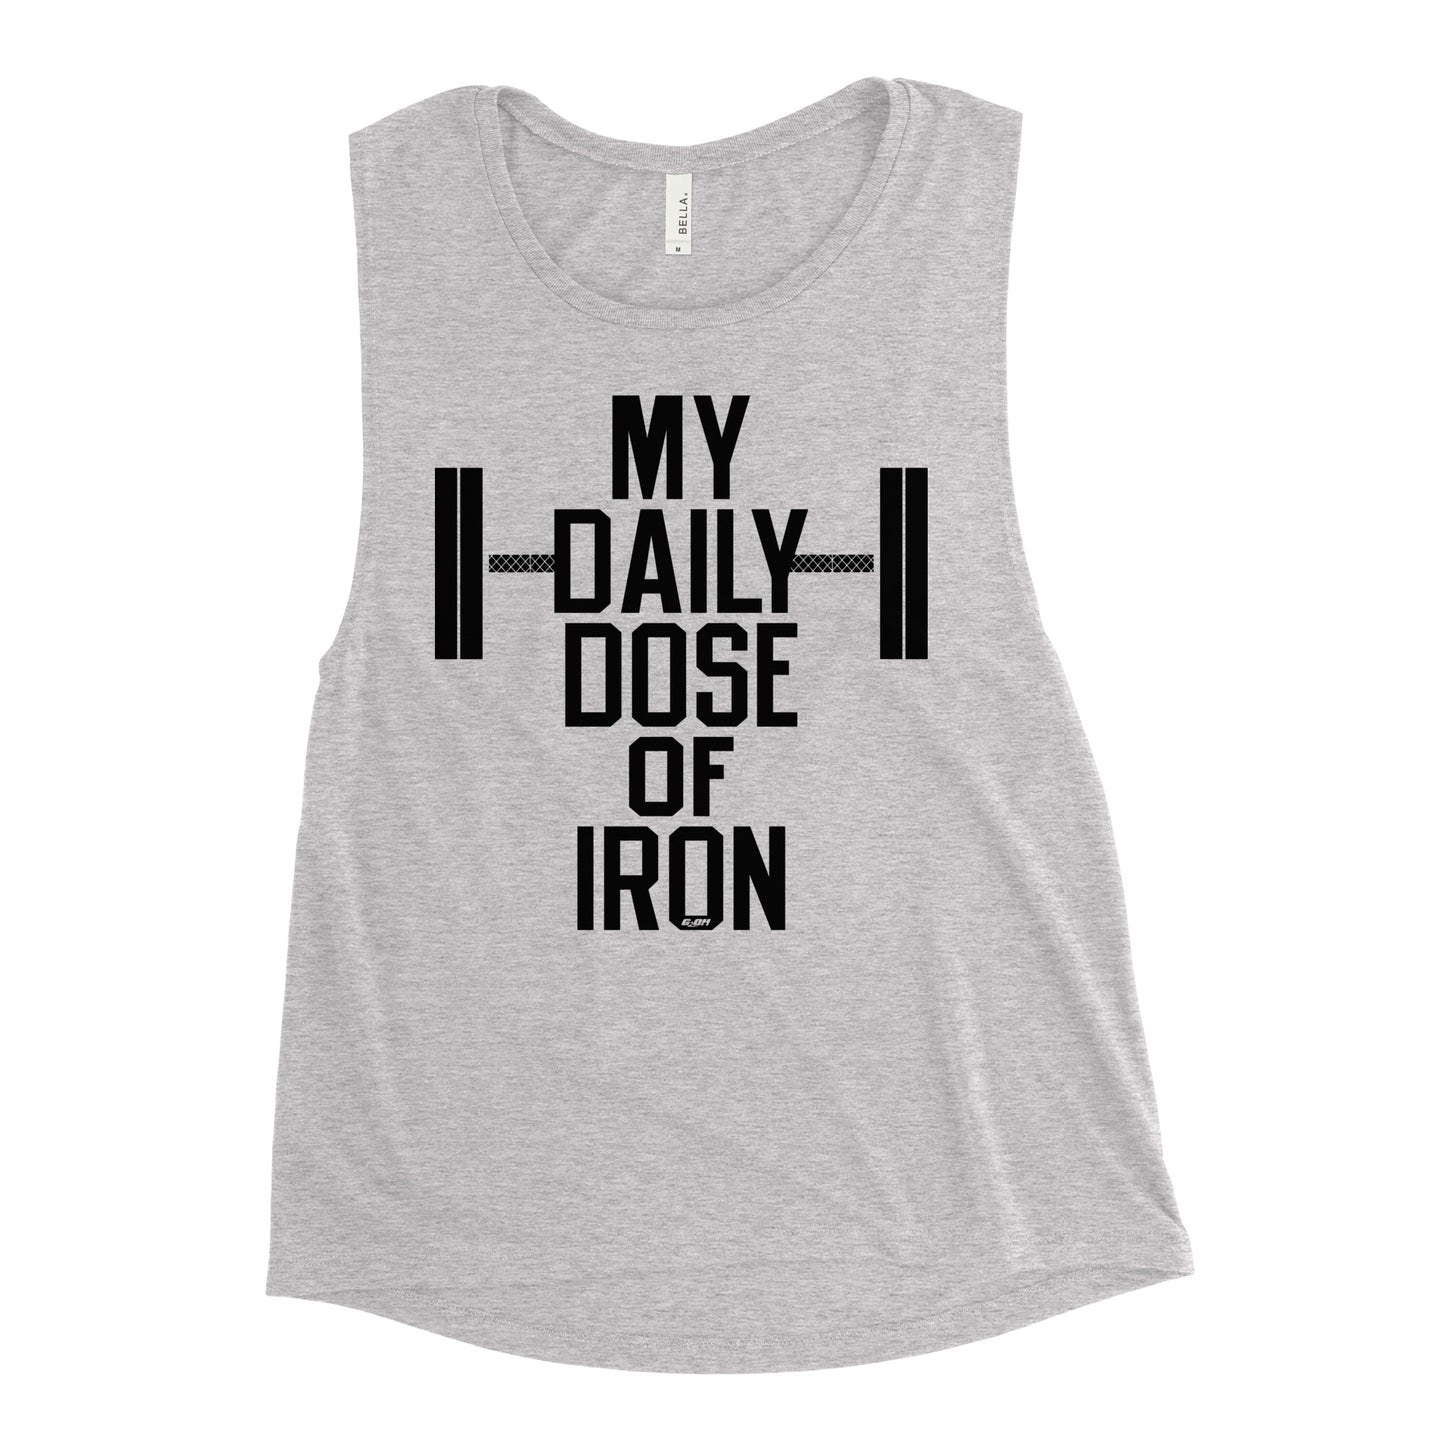 My Daily Dose Of Iron Women's Muscle Tank